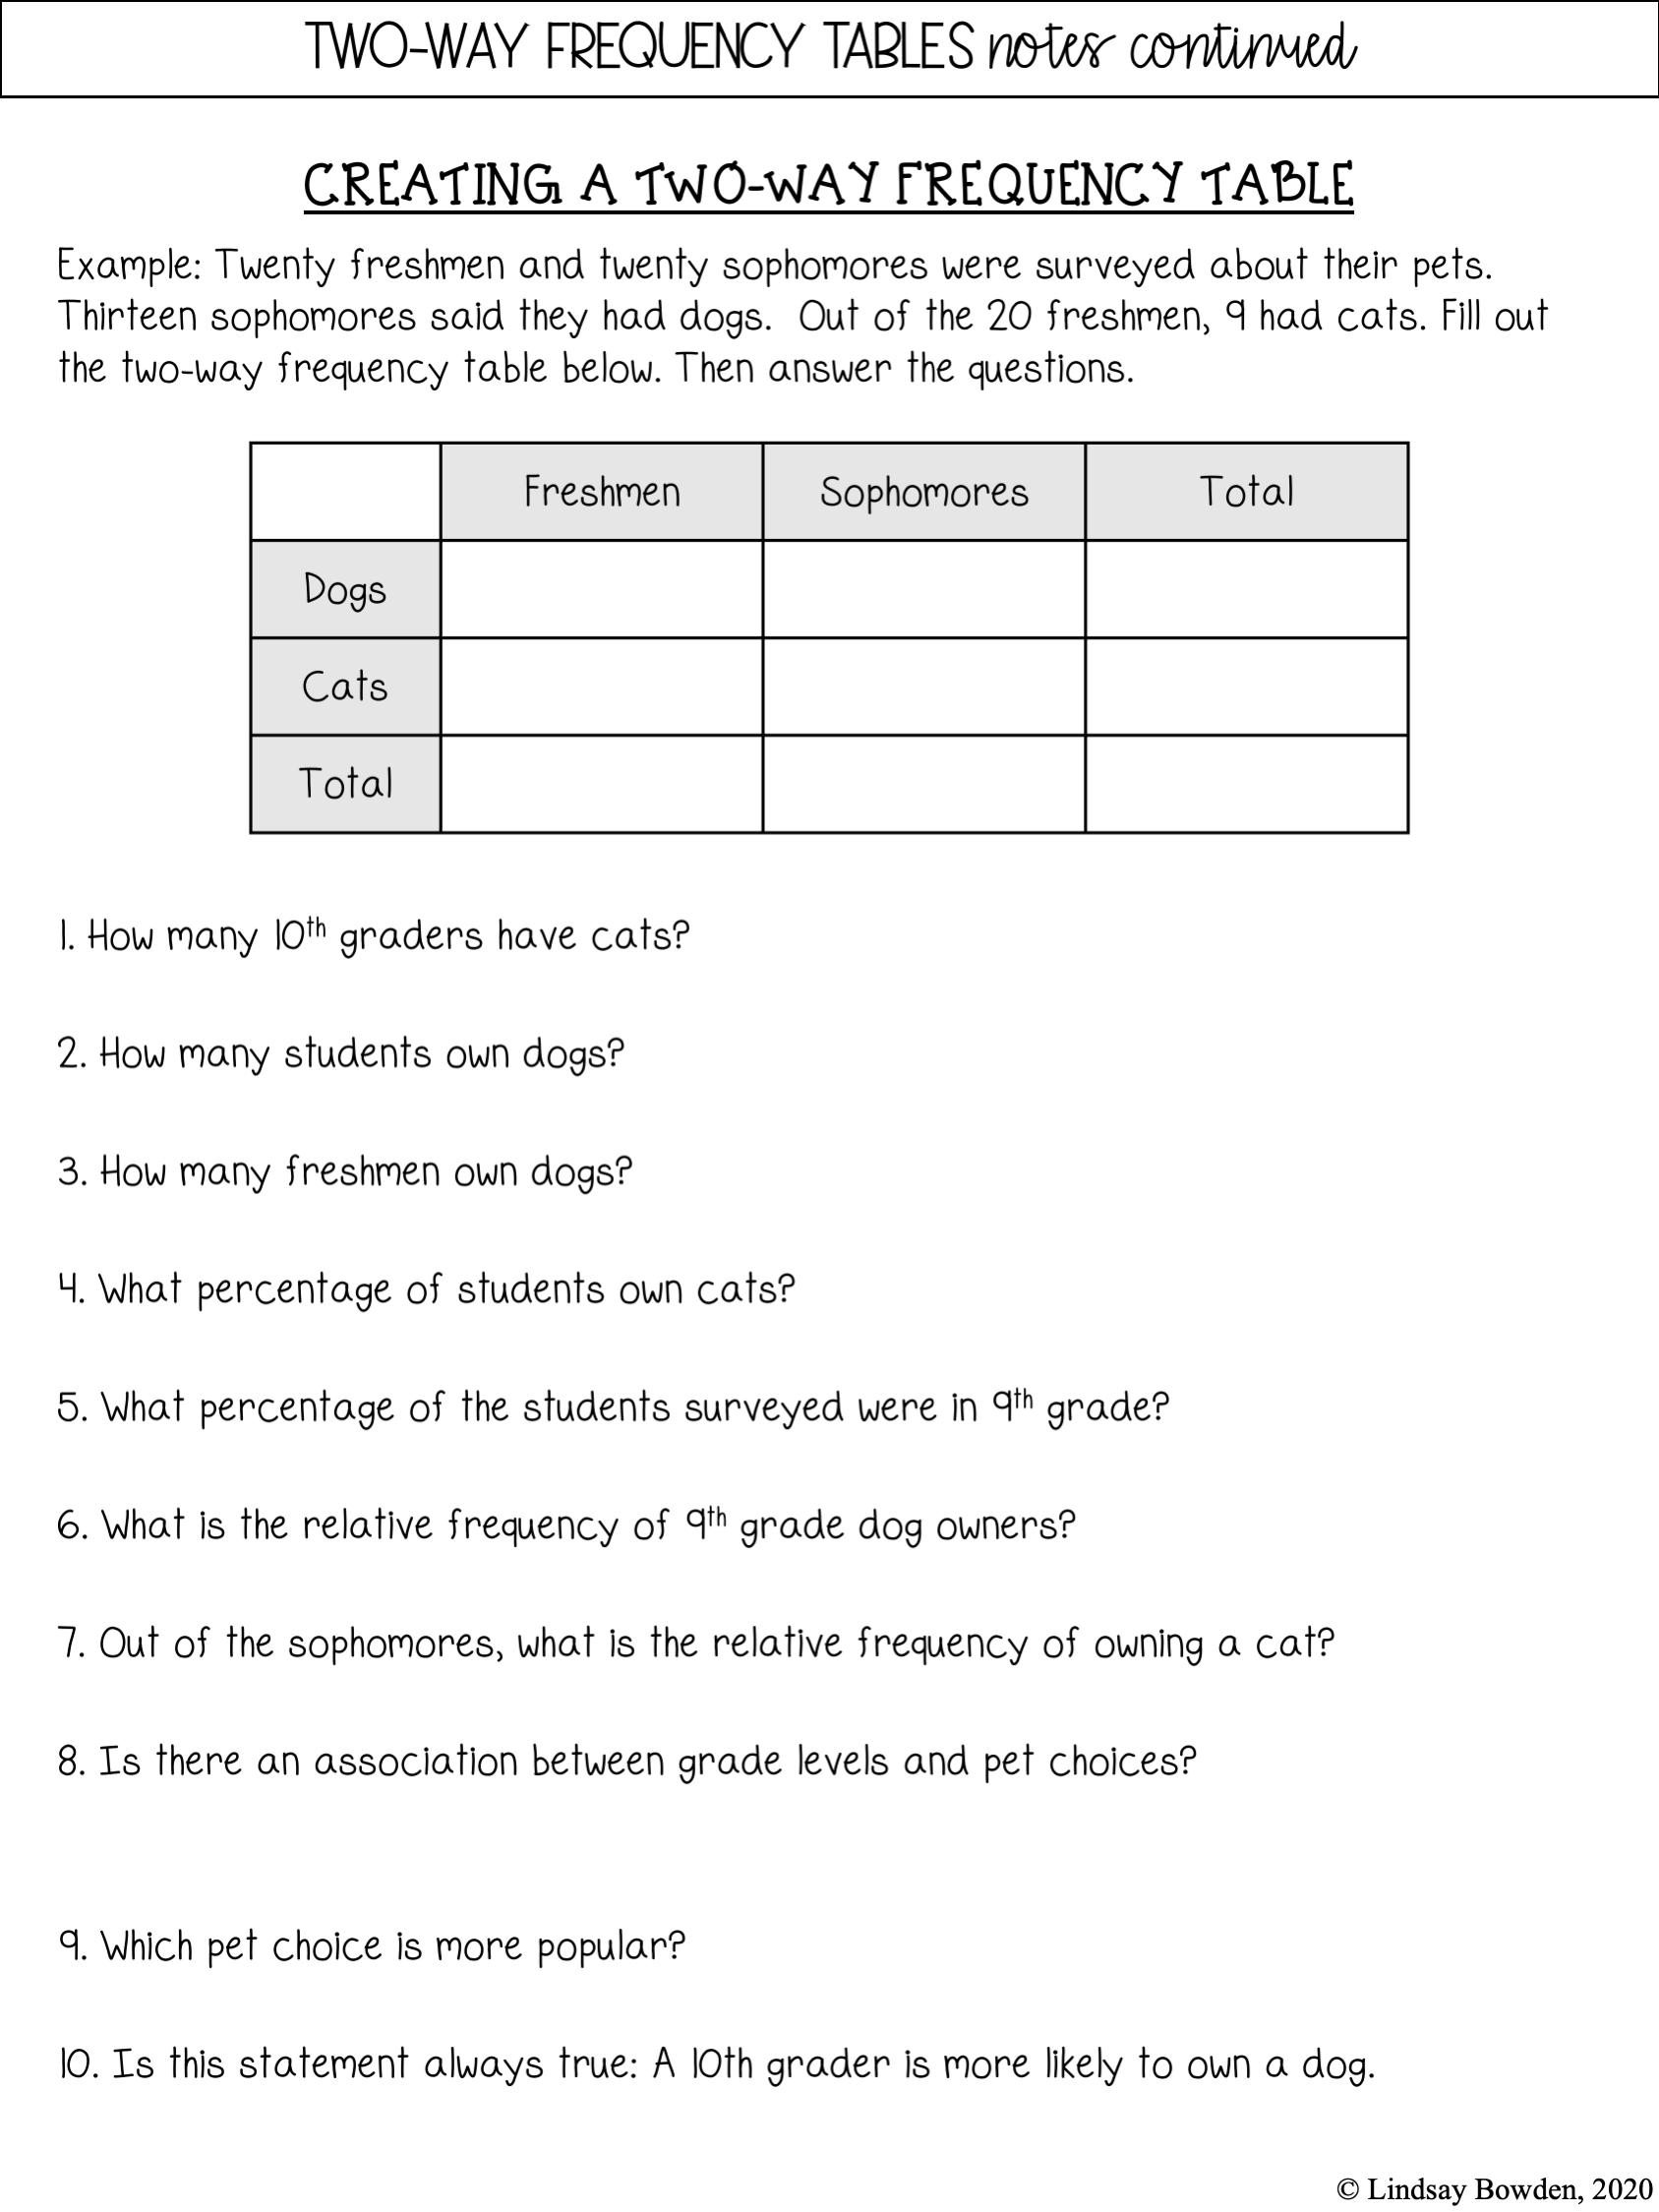 Two-Way Frequency Tables Notes and Worksheets - Lindsay Bowden With Regard To Two Way Frequency Table Worksheet